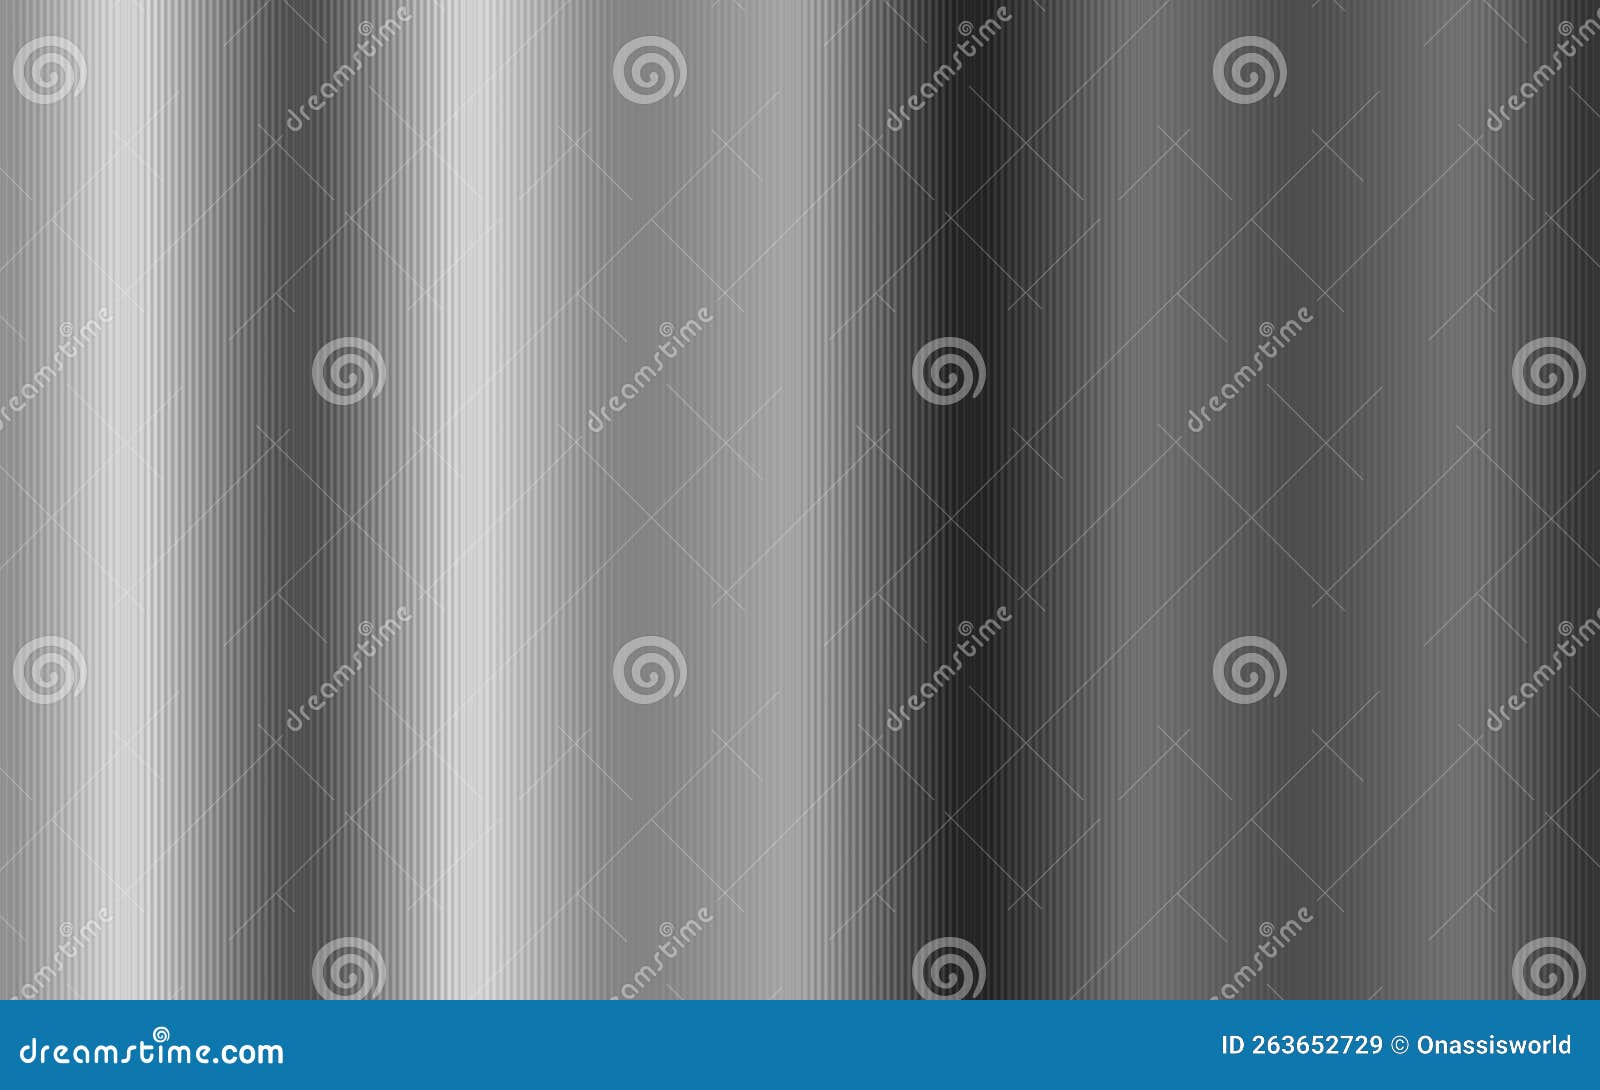 B&W Black and White Abstract Background Blurs Textures and Shapes Stock ...